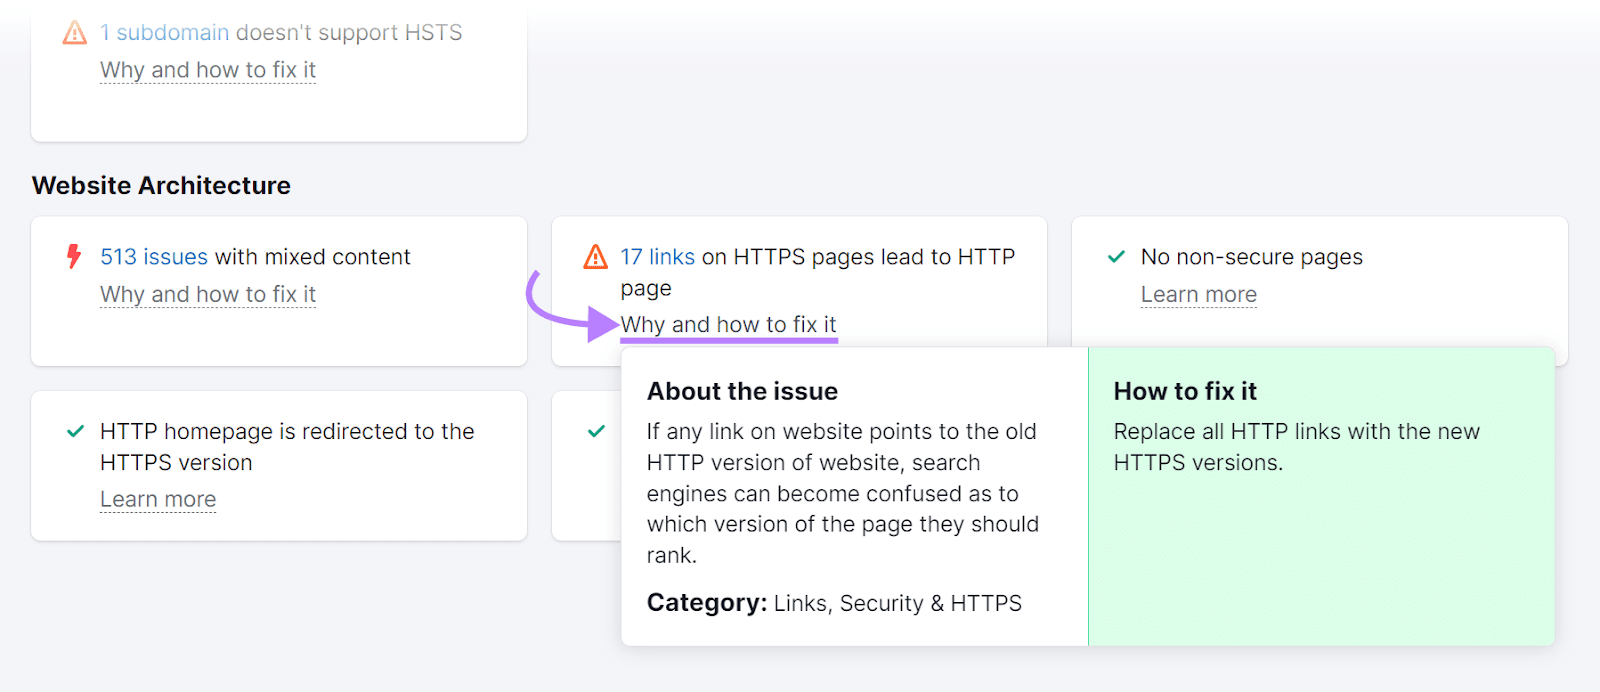 how to fix an issue of links on HTTPS pages that lead to HTTP pages